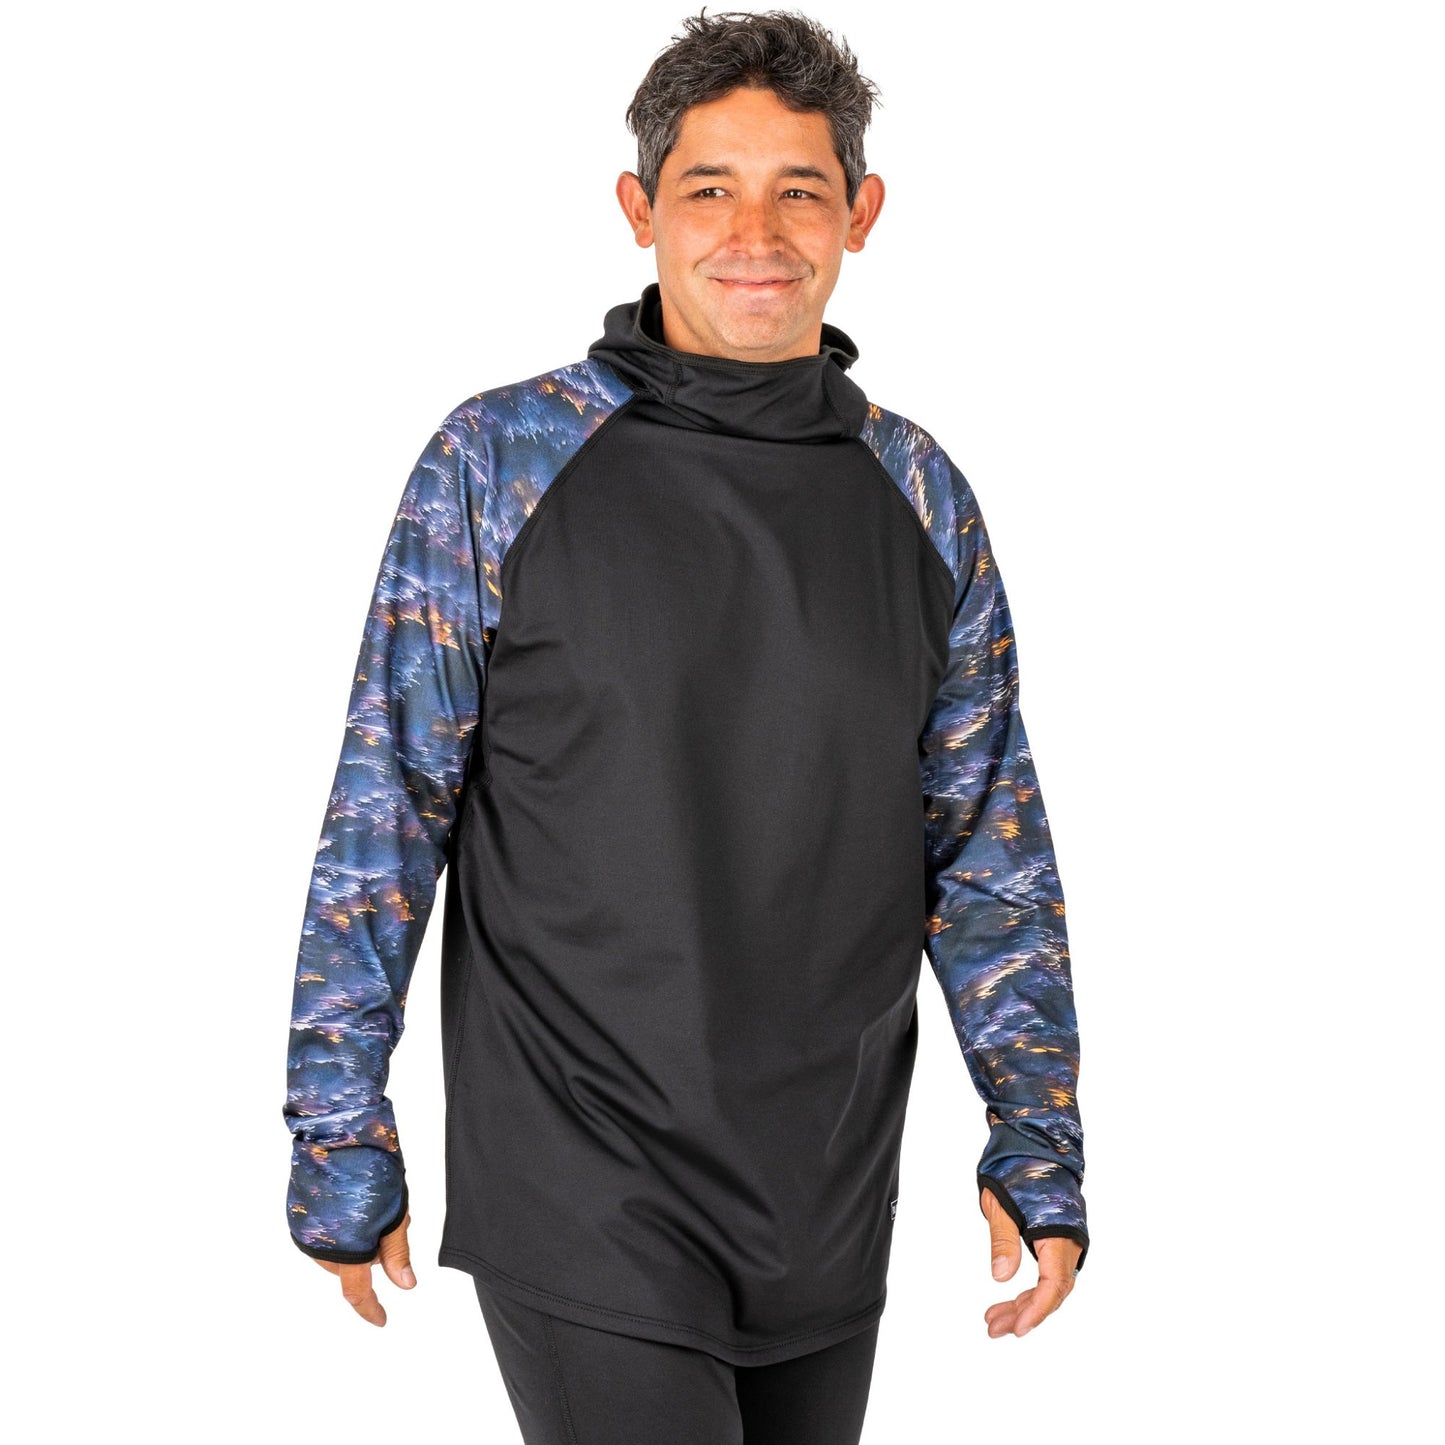 Blackstrap Men's Therma Baselayer Hooded Top Glitch Storm Base Layer Tops